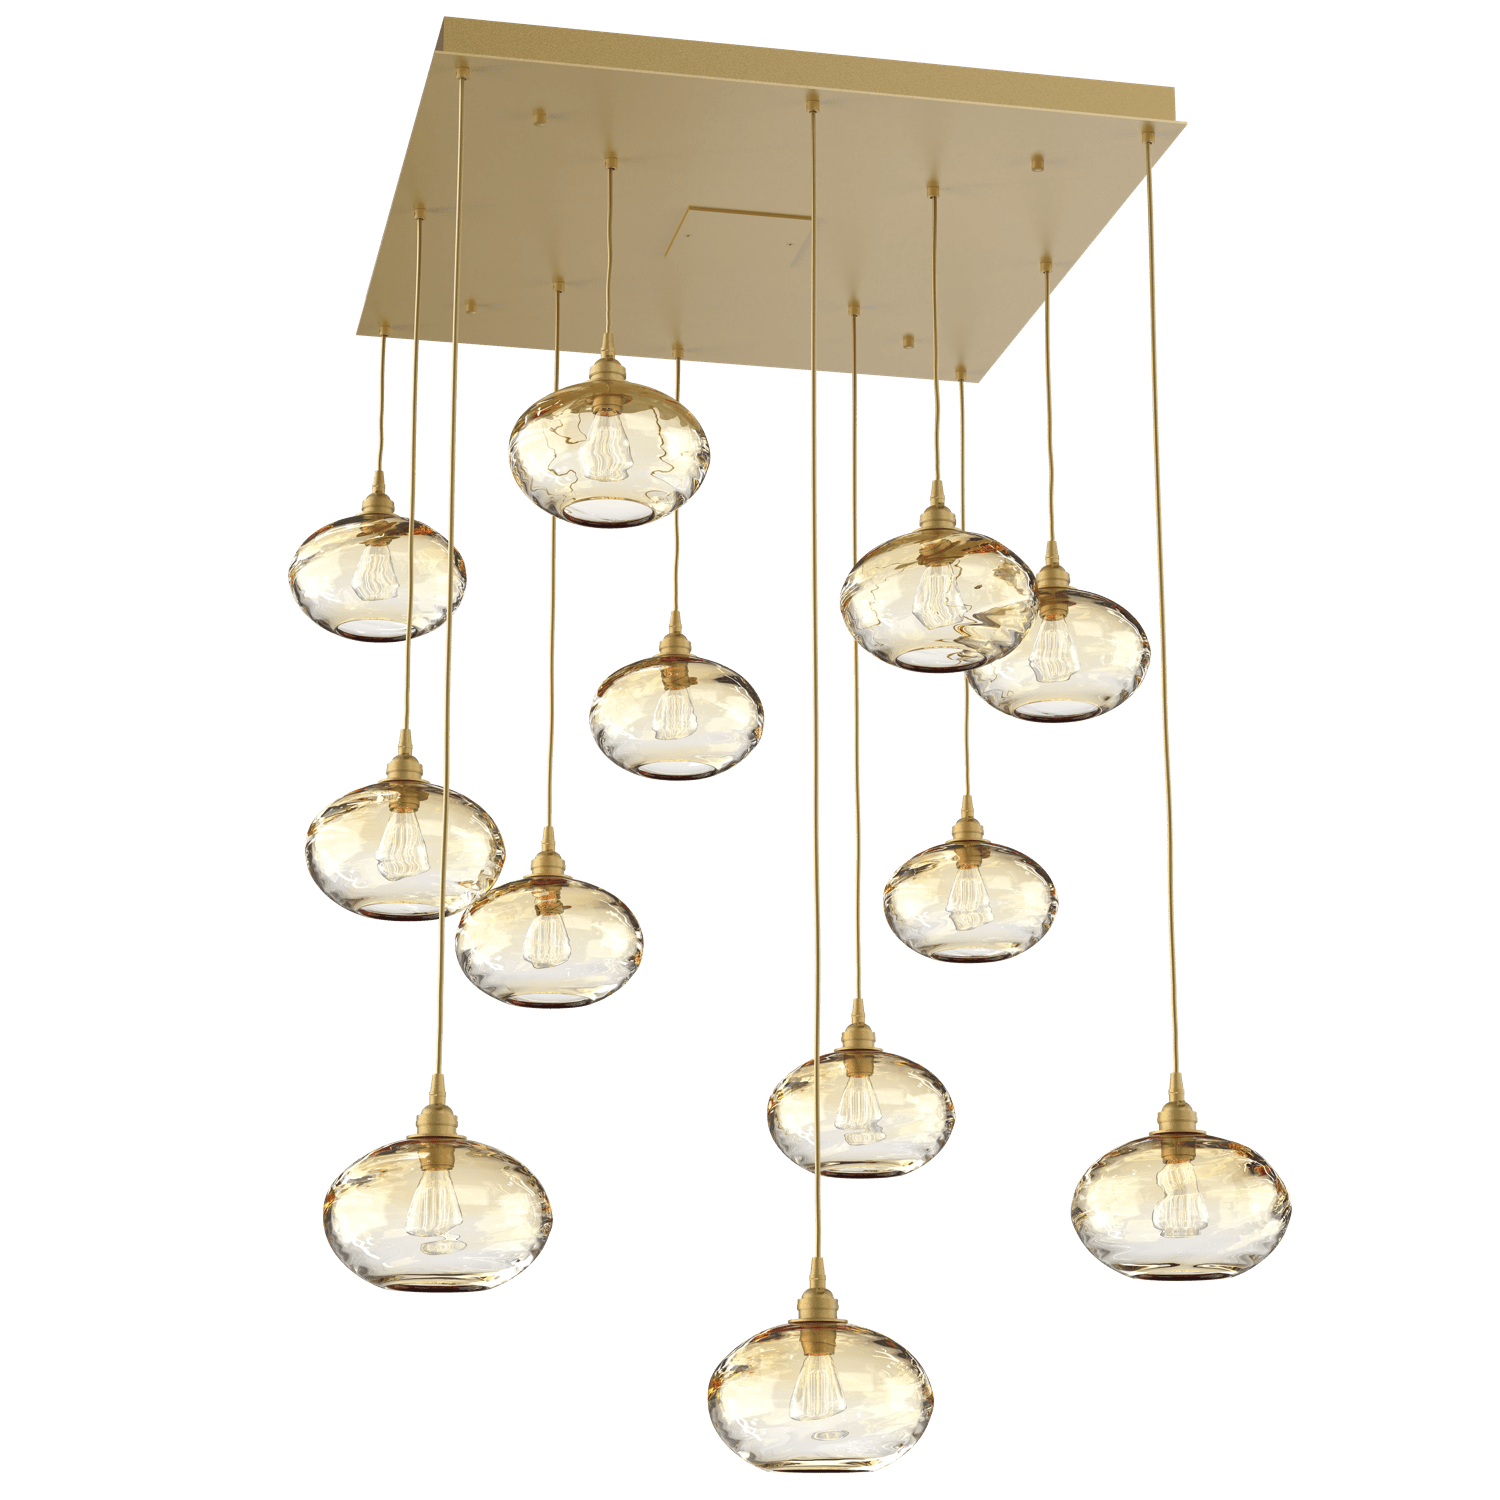 CHB0036-12-GB-OA-Hammerton-Studio-Optic-Blown-Glass-Coppa-12-light-square-pendant-chandelier-with-gilded-brass-finish-and-optic-amber-blown-glass-shades-and-incandescent-lamping